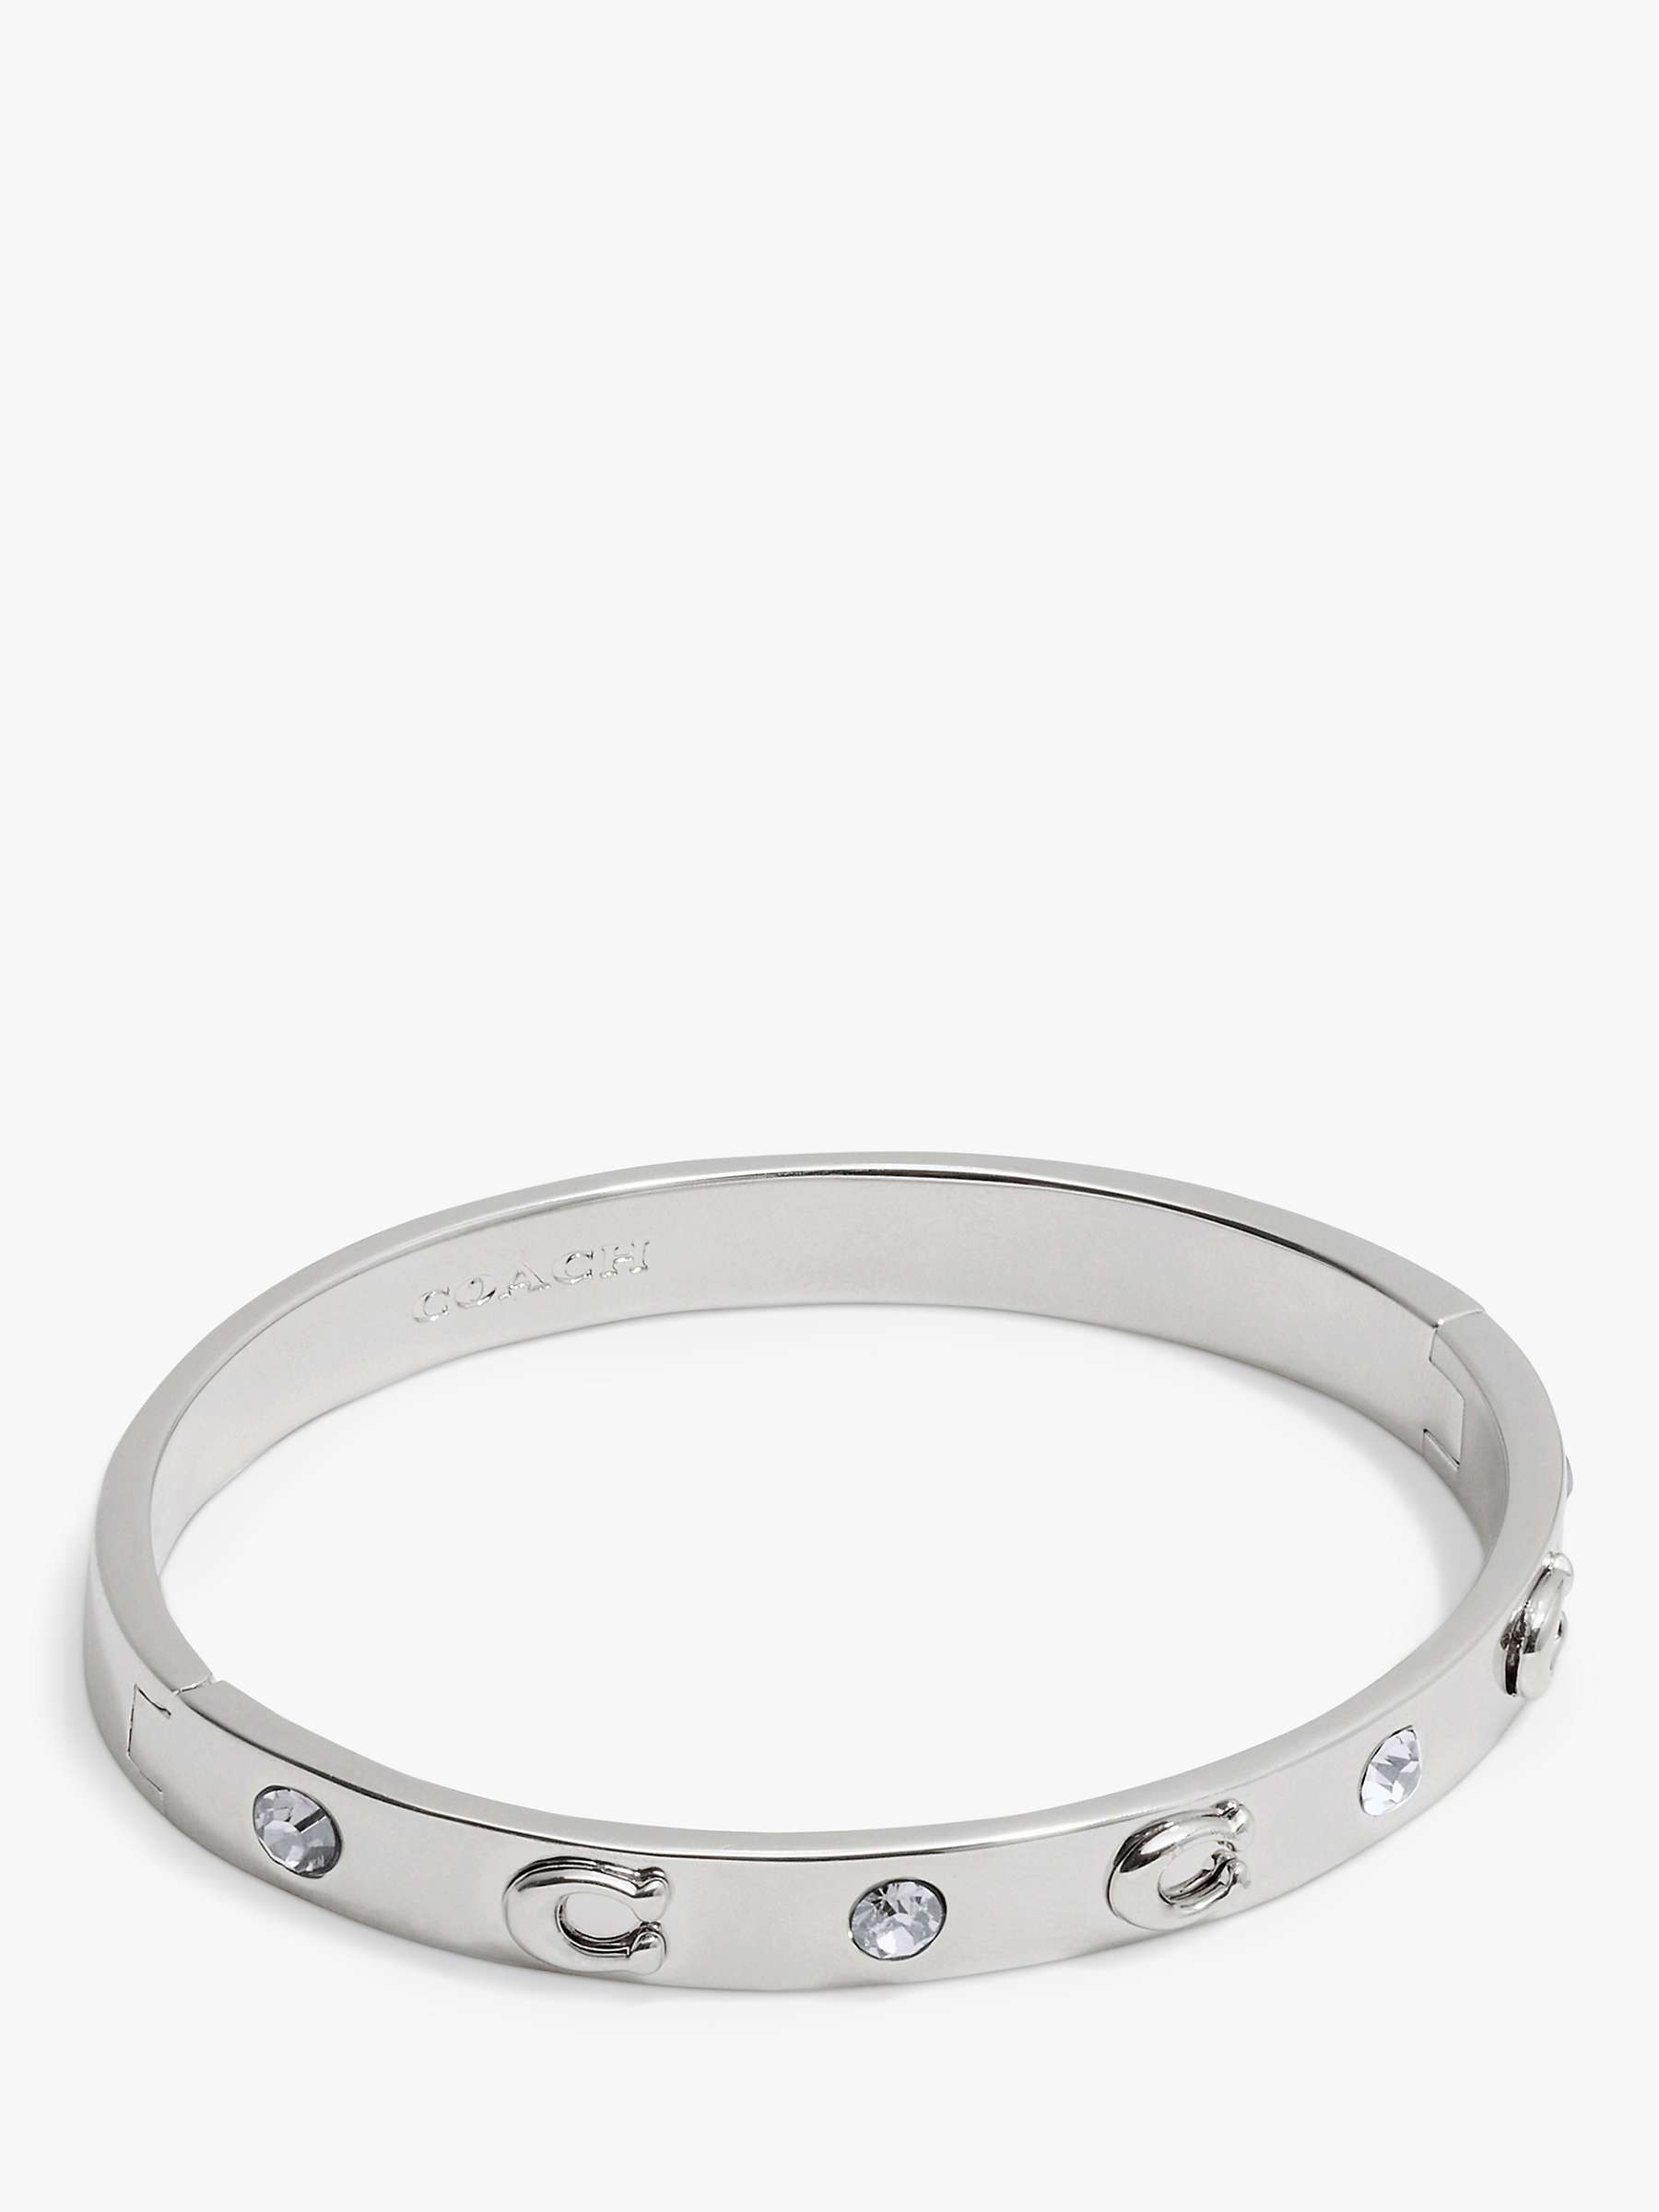 Buy Coach Logo and Crystal Hinged Bangle Online at johnlewis.com